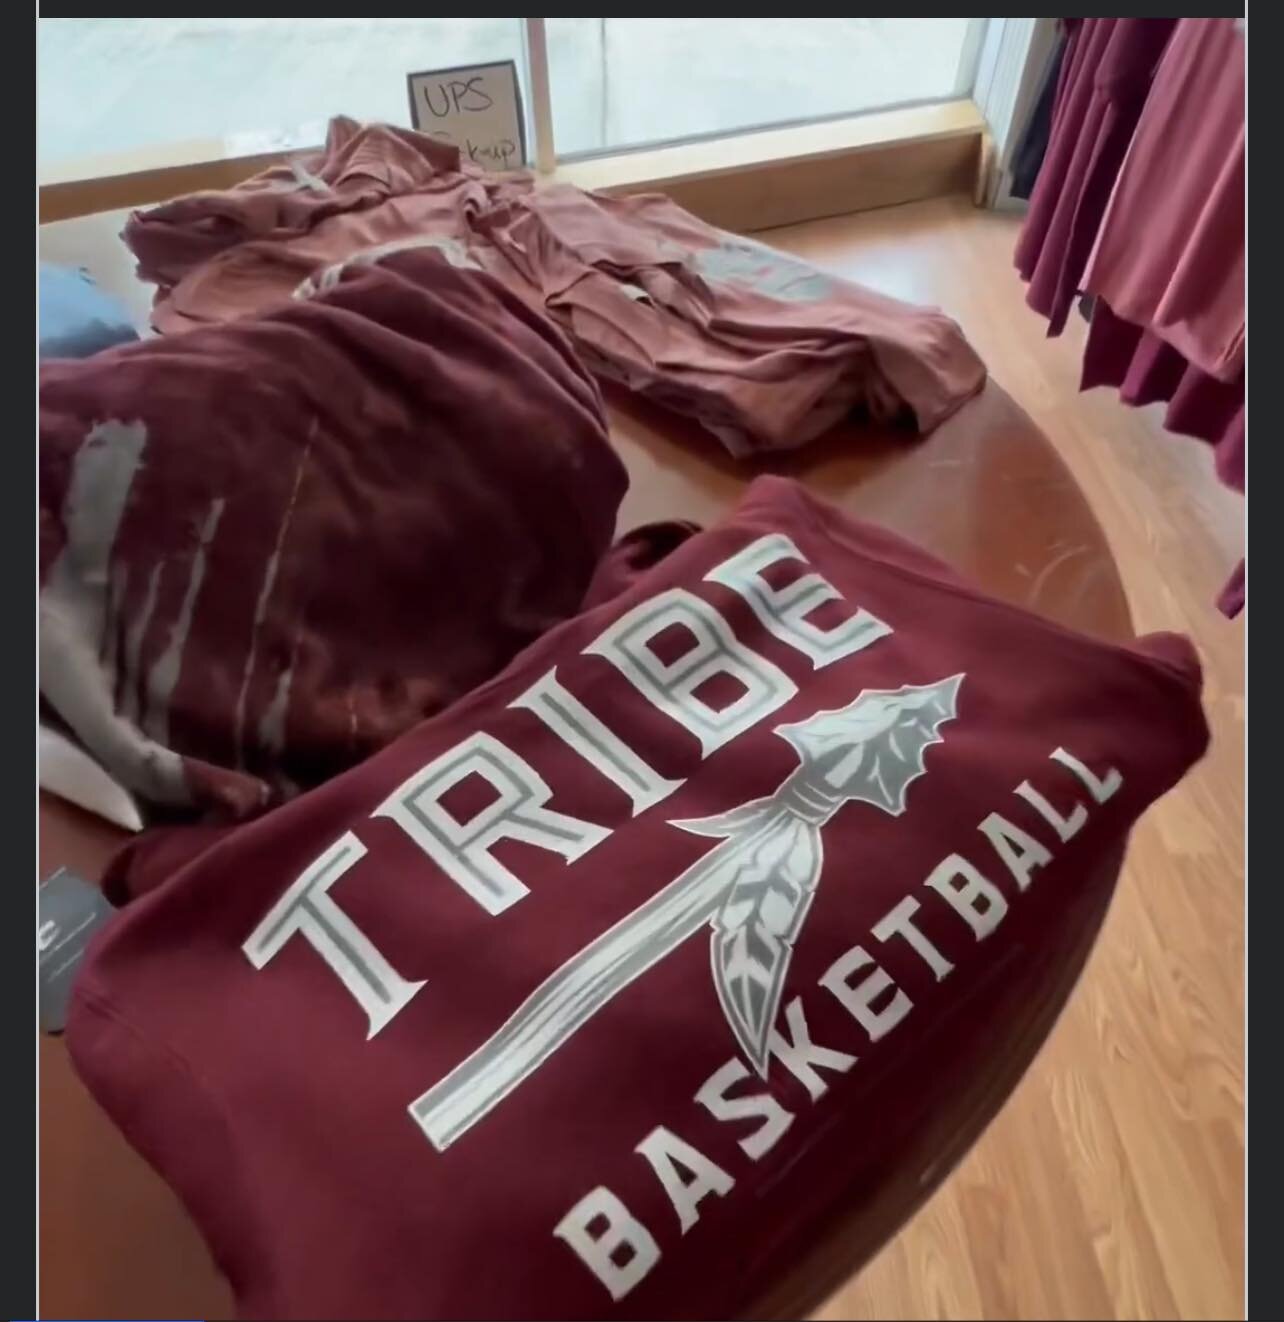 Of course we have Tribe Gear in stock! We can also print more custom Tribe Gear in house. What specific products would you like to see? Come drop by the store front. @kcs__dobynsbennett #supportlocal